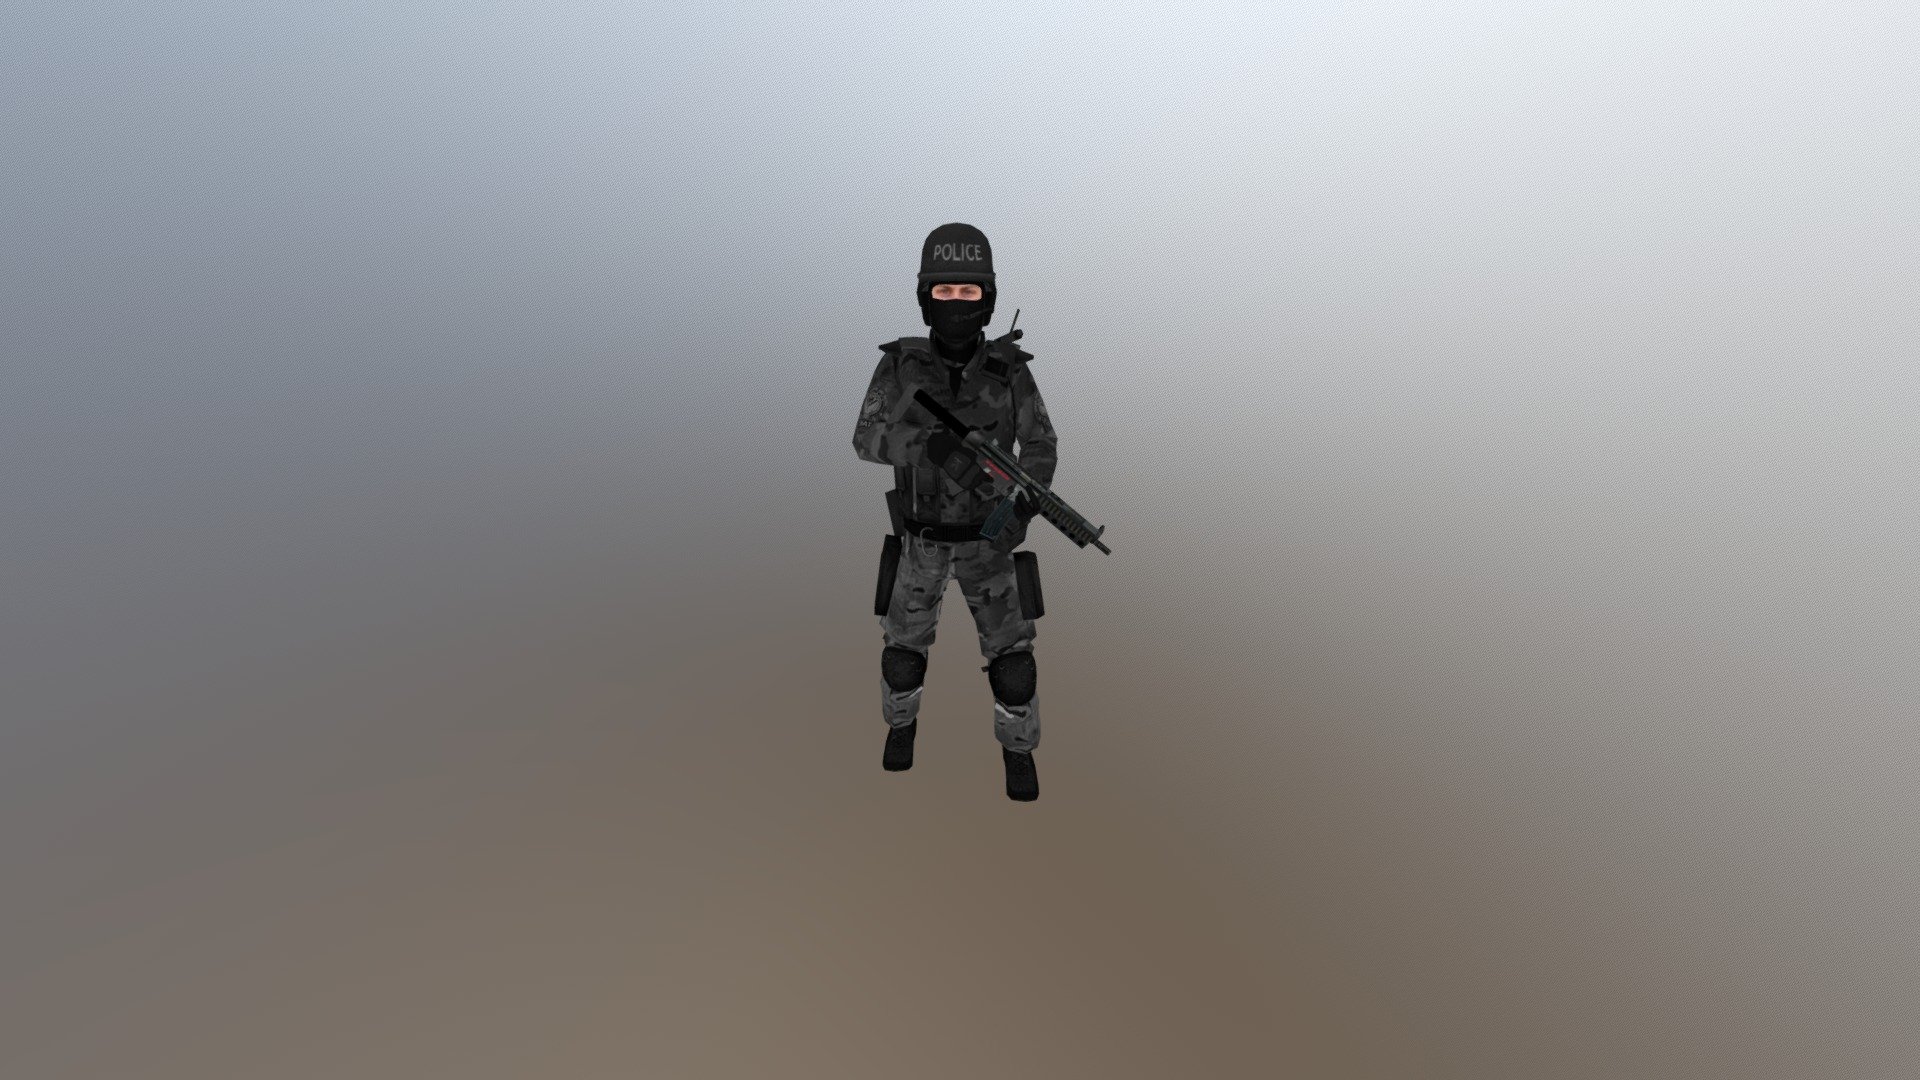 Megapack of 139 quality Grew Camo police animations with a gun to create your own marvellous brand new RPG /FPS/Simulations or any genre of game. 
 Gun Animations, Reloads, Crouches Fight, deaths, talks, runs, walks, listening animations for covering all of your needs. 
 Animation Frame Range Excel Spreadsheet with Frame Ranges:
 https://www.dropbox.com/s/fuh7uz6c73oncif/S.W.A.T_Animations.xlsx?dl=0 
 You can watch video presentation for full breakdown of all animations. 
 Contact arjun@appymonkeys.com for feedback 3d model